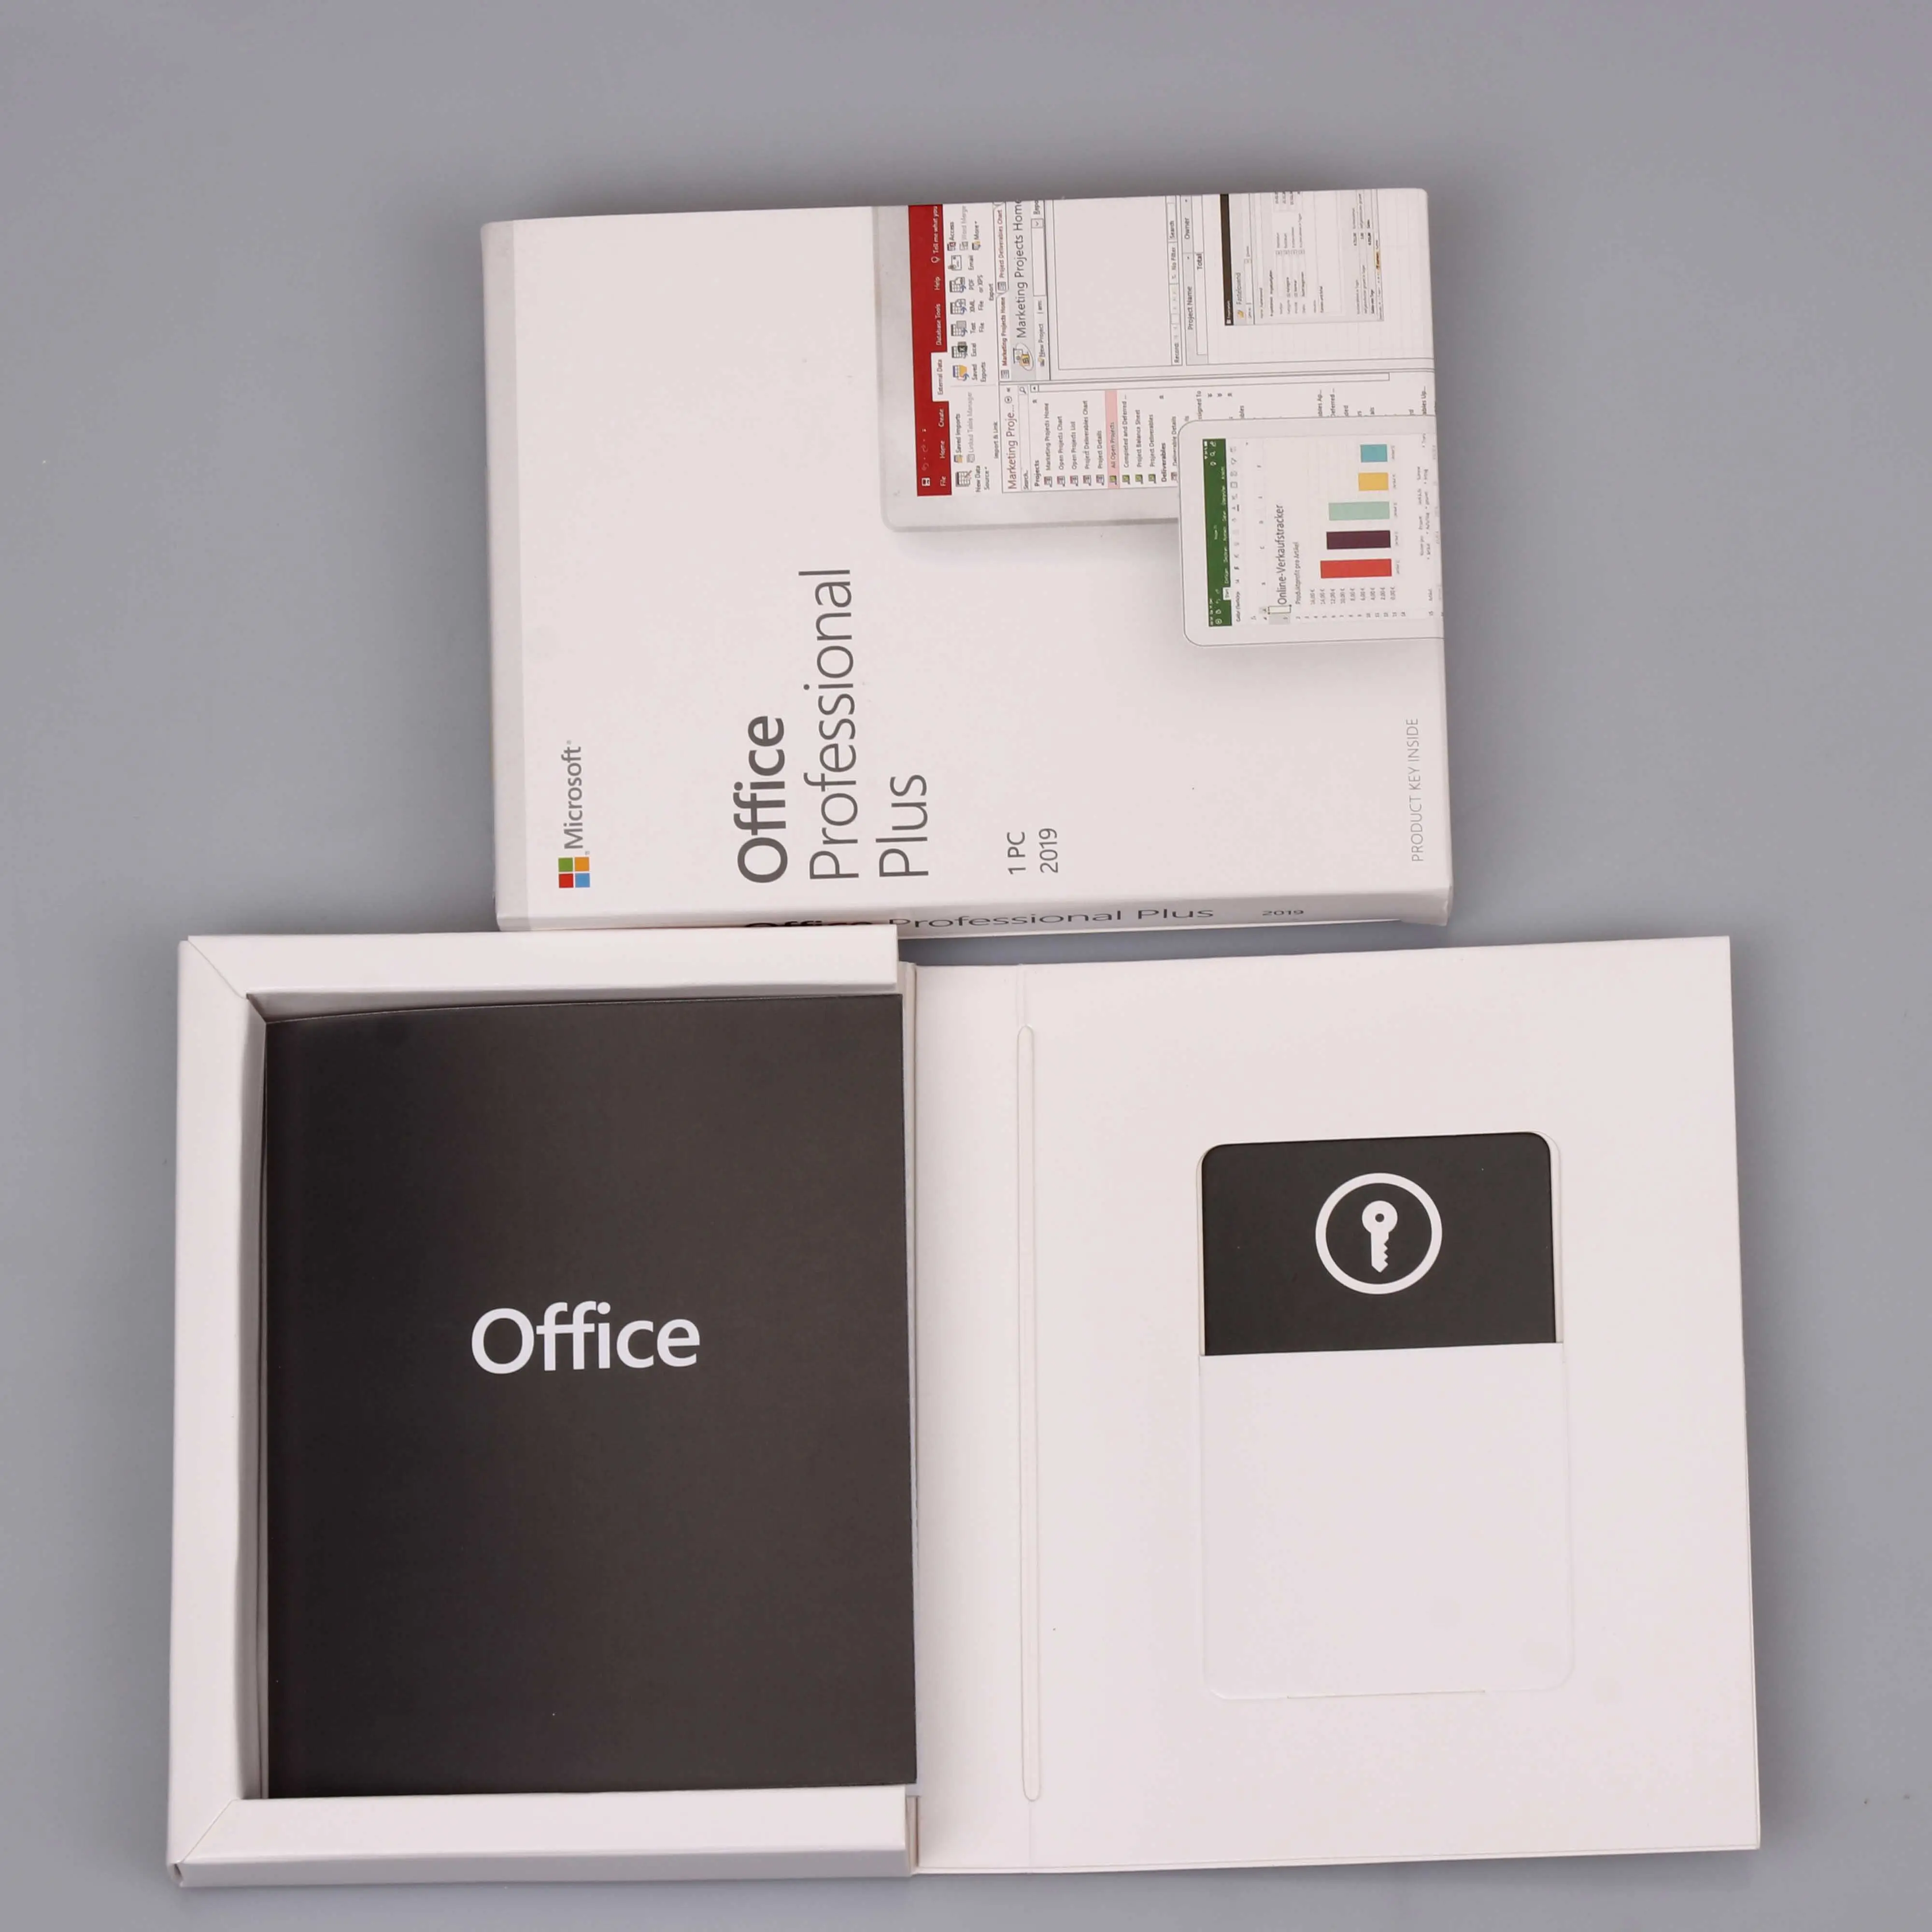 Office 2019 pro plus USB full package keycard installation USB Free shipping office 2019